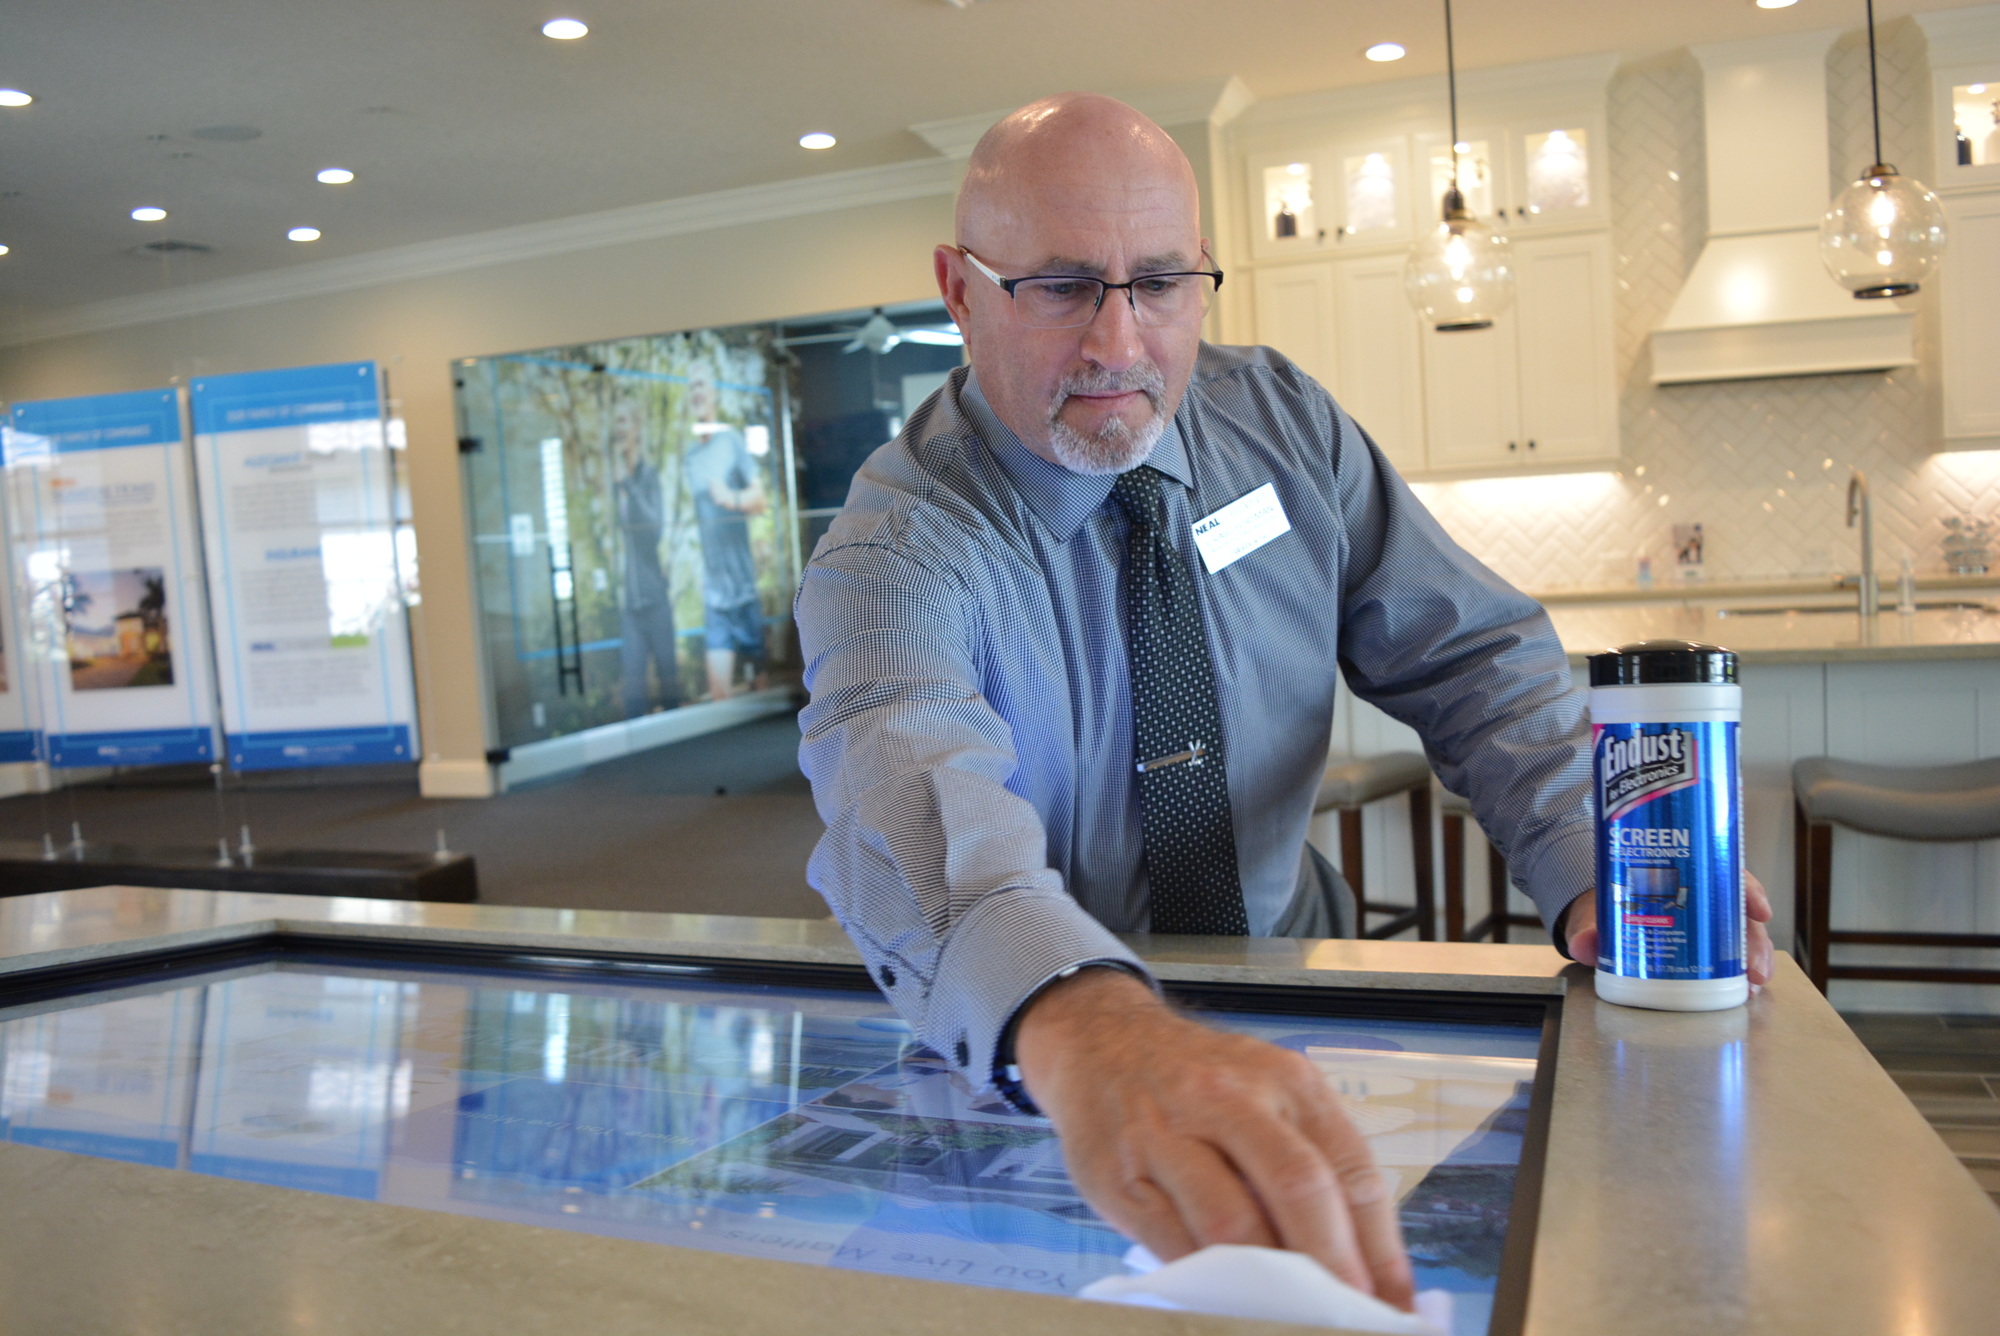 Neal Communities sales associate Craig Forsman disinfects the interactive display he uses to show customers the Indigo community in Lakewood Ranch. Associates are cleaning more to ensure the health of themselves and customers.